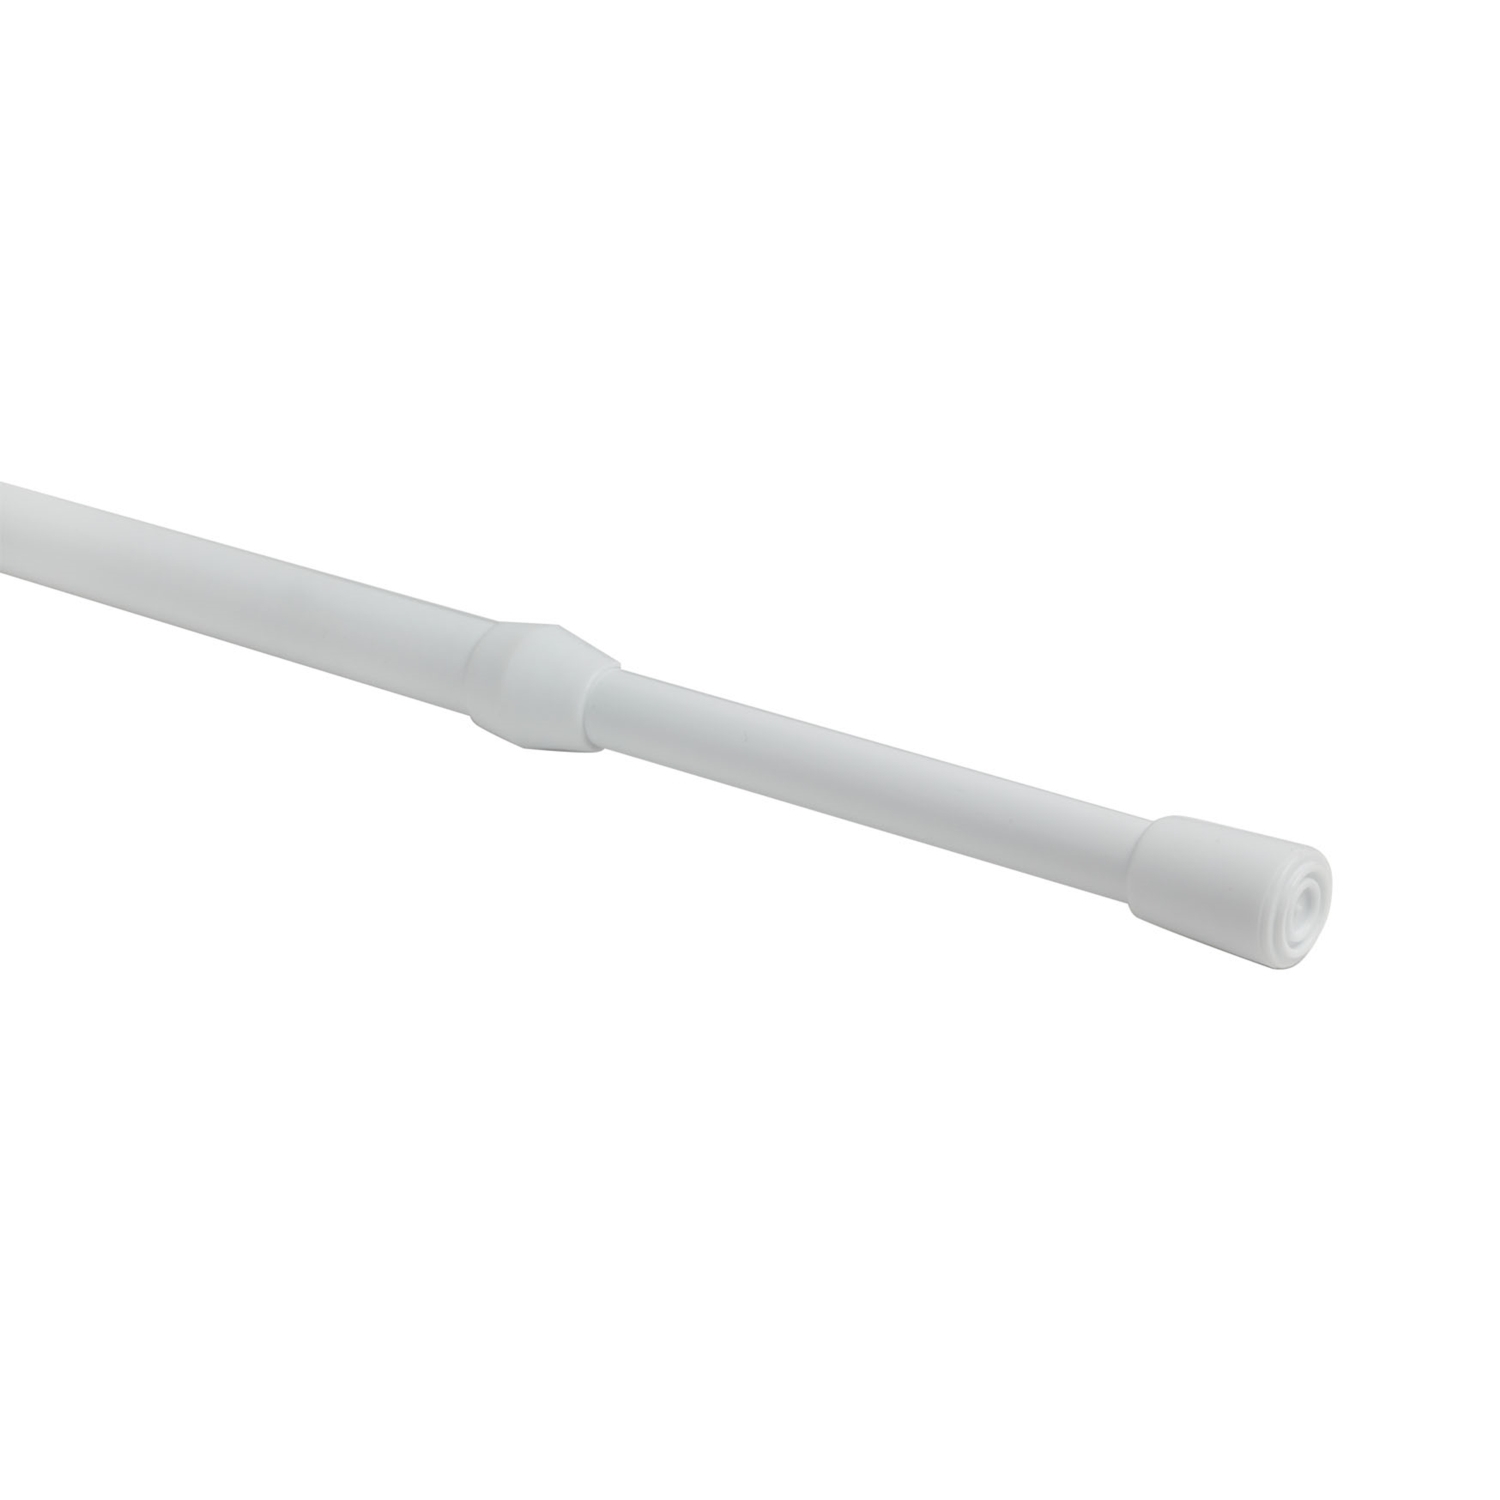 White Extendable Simply Tension Rod 91 to 152cm Image